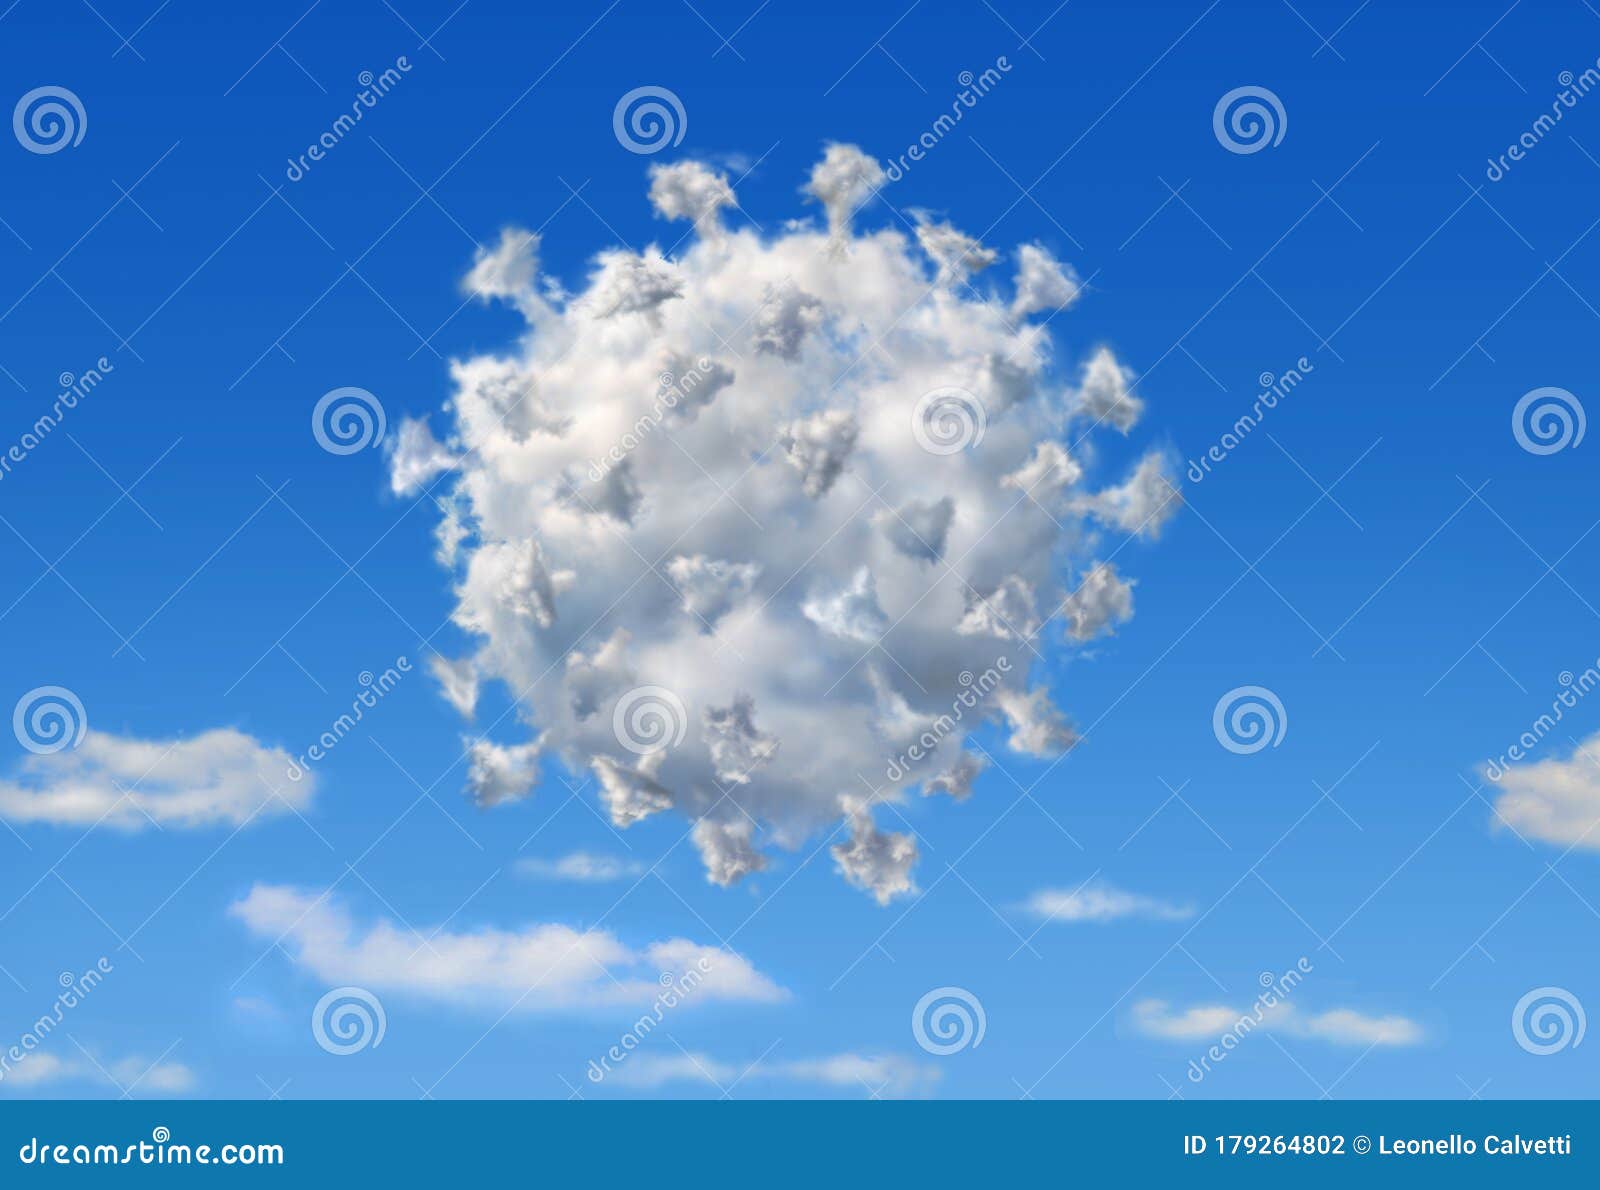 fluffy cloud with the  of coronavirus covid19